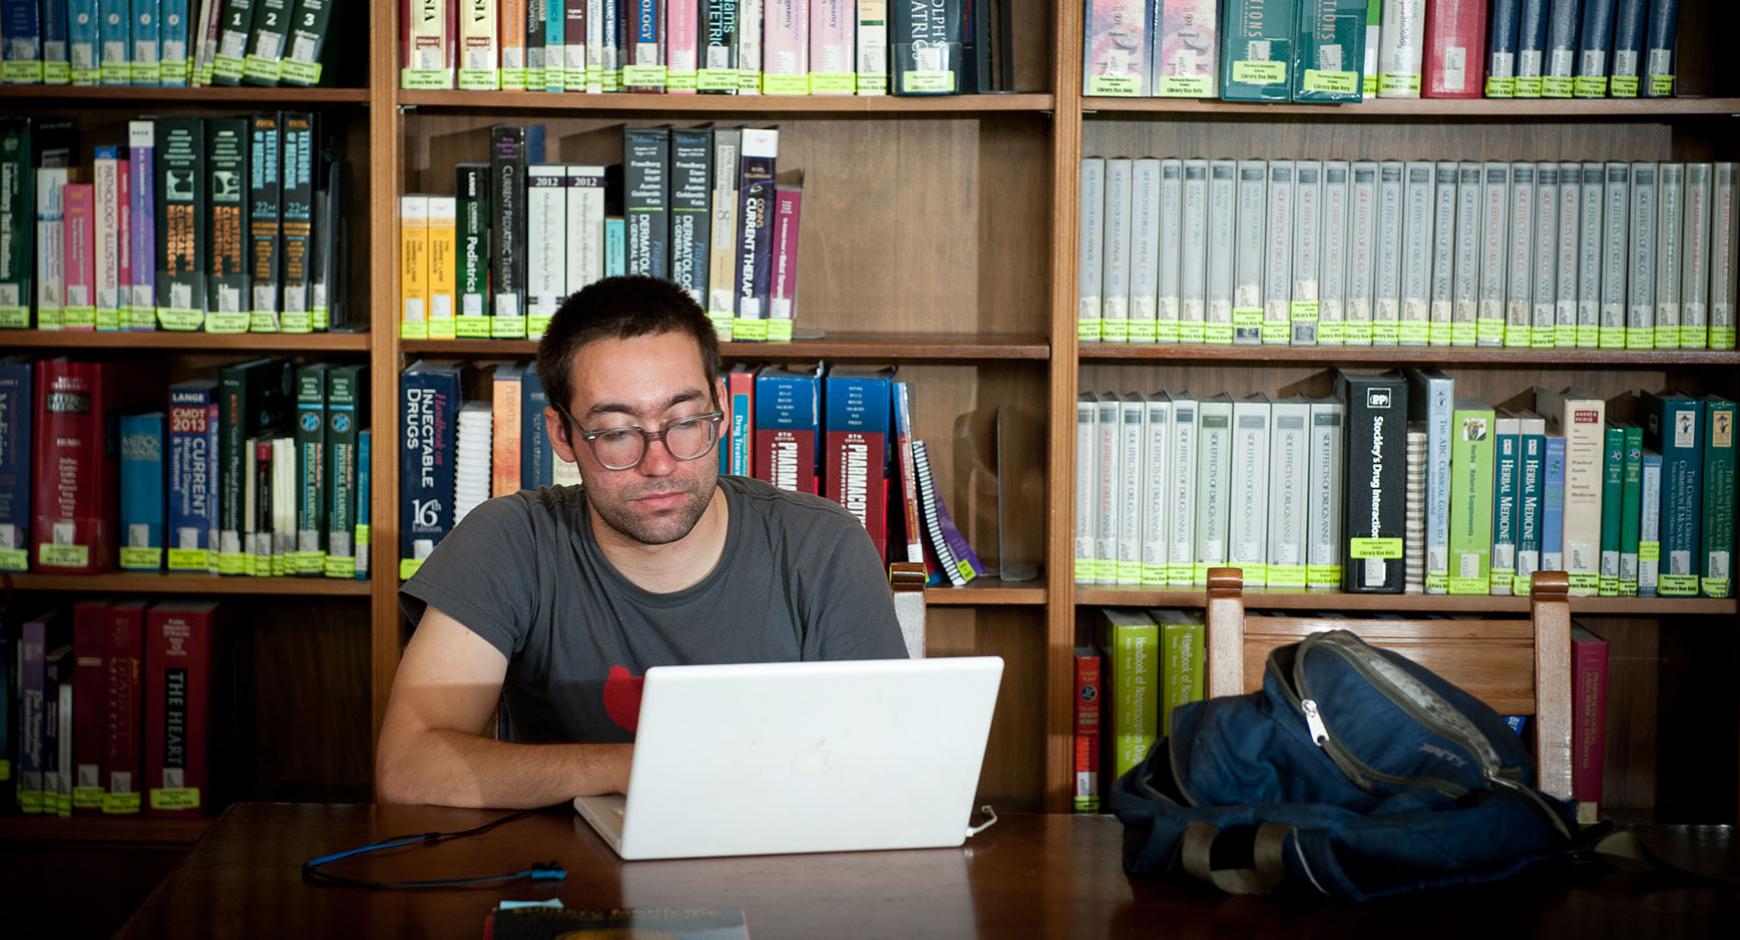 man in glasses works on laptop in front of bookcases in classic library space